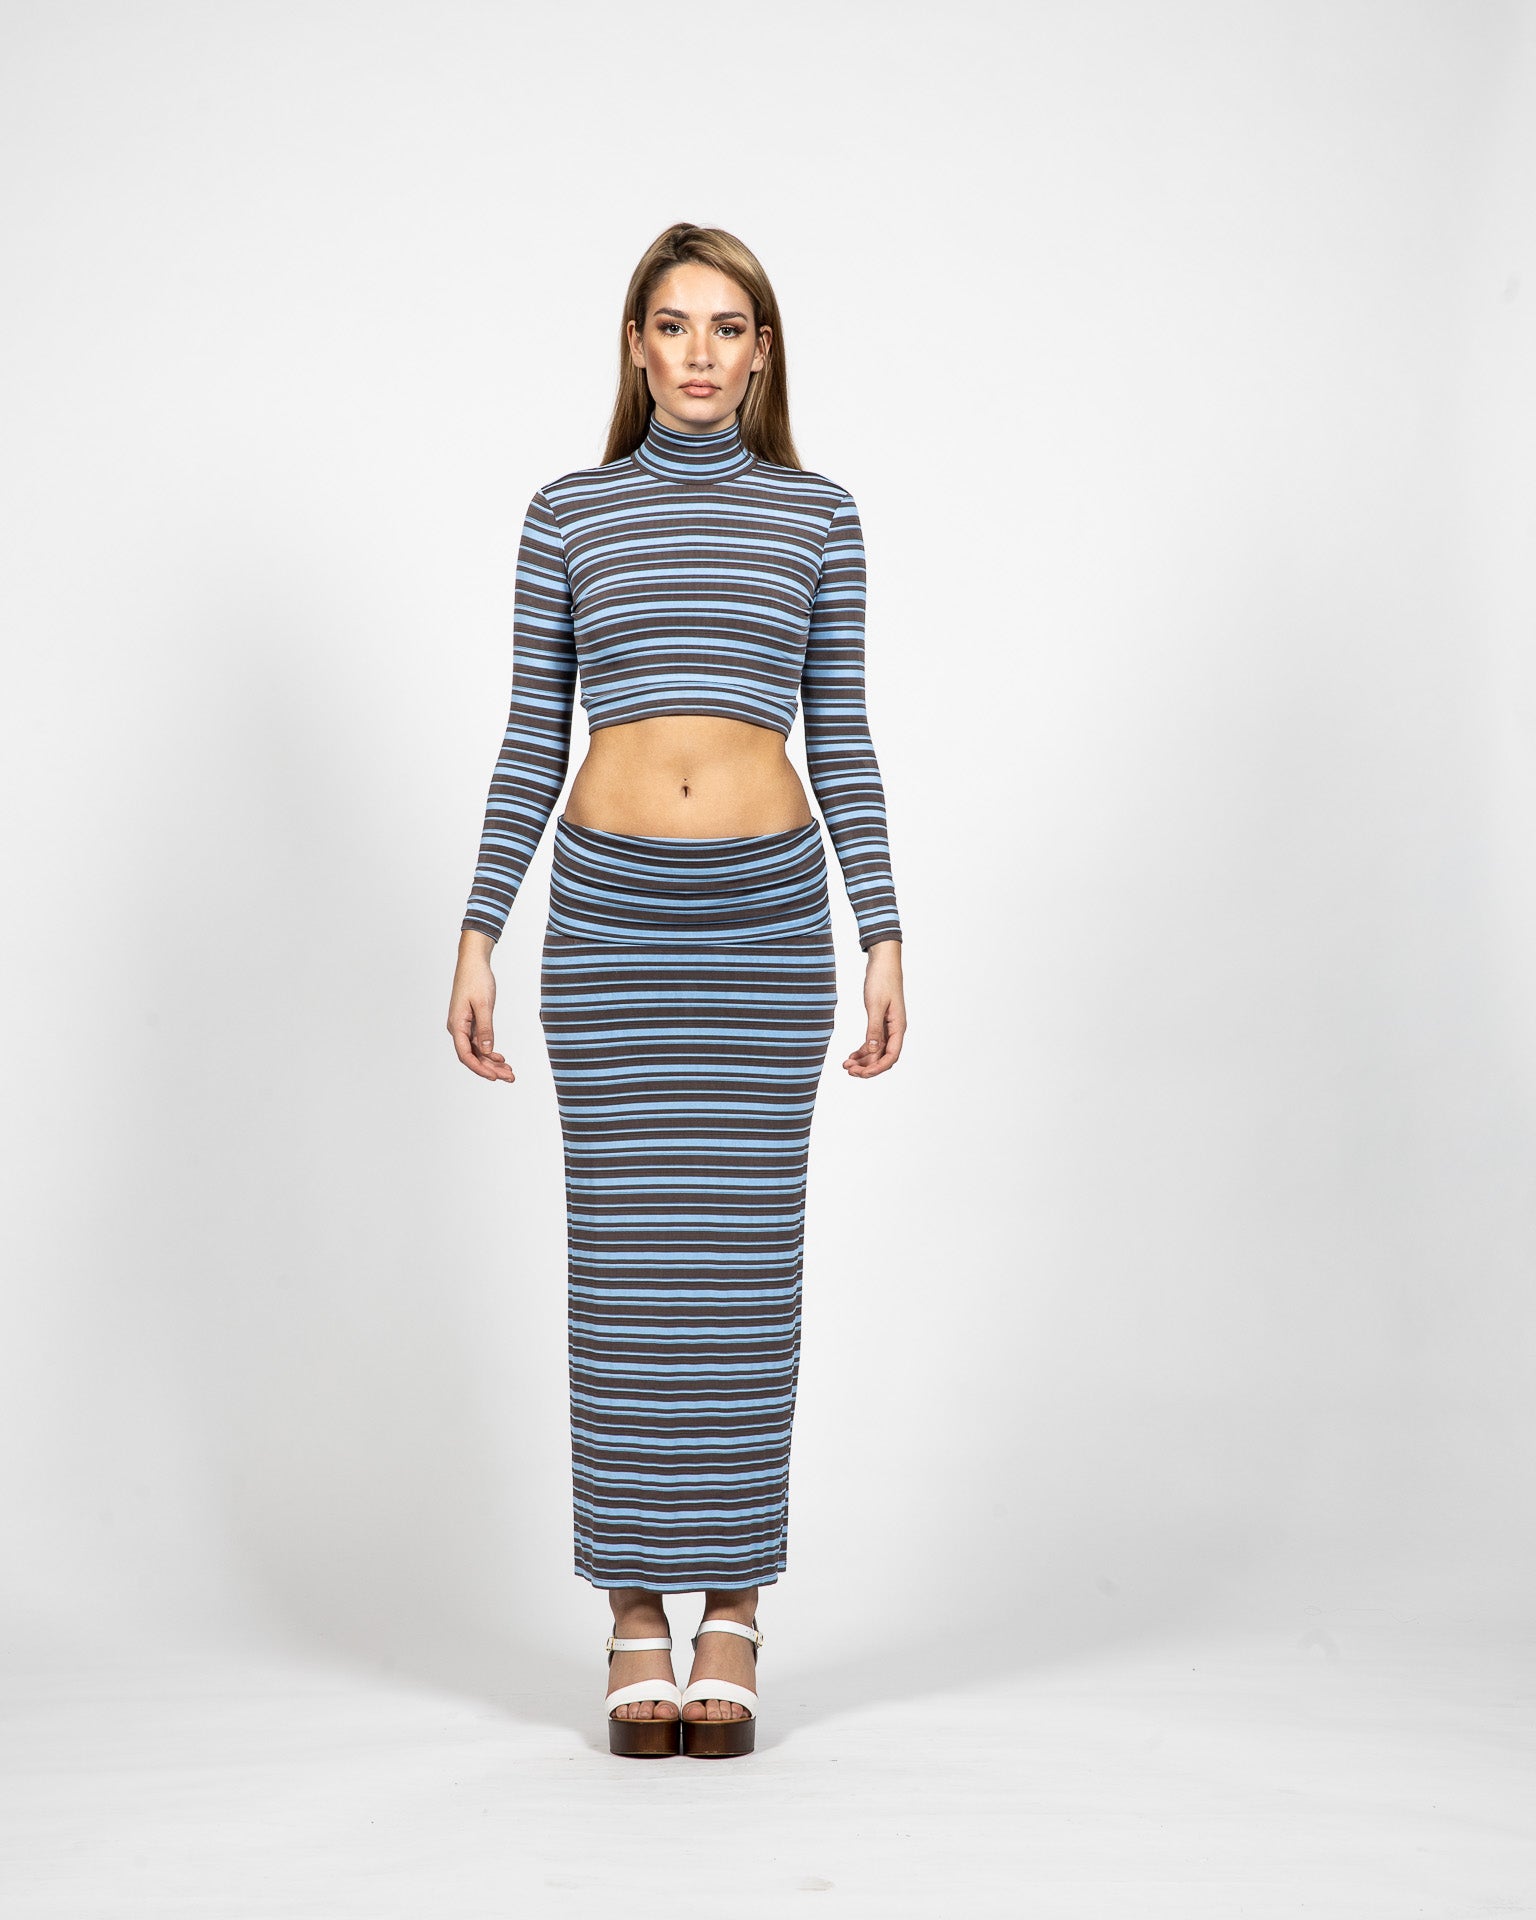 Printed Top With Matching Skirt - Front View - Samuel Vartan